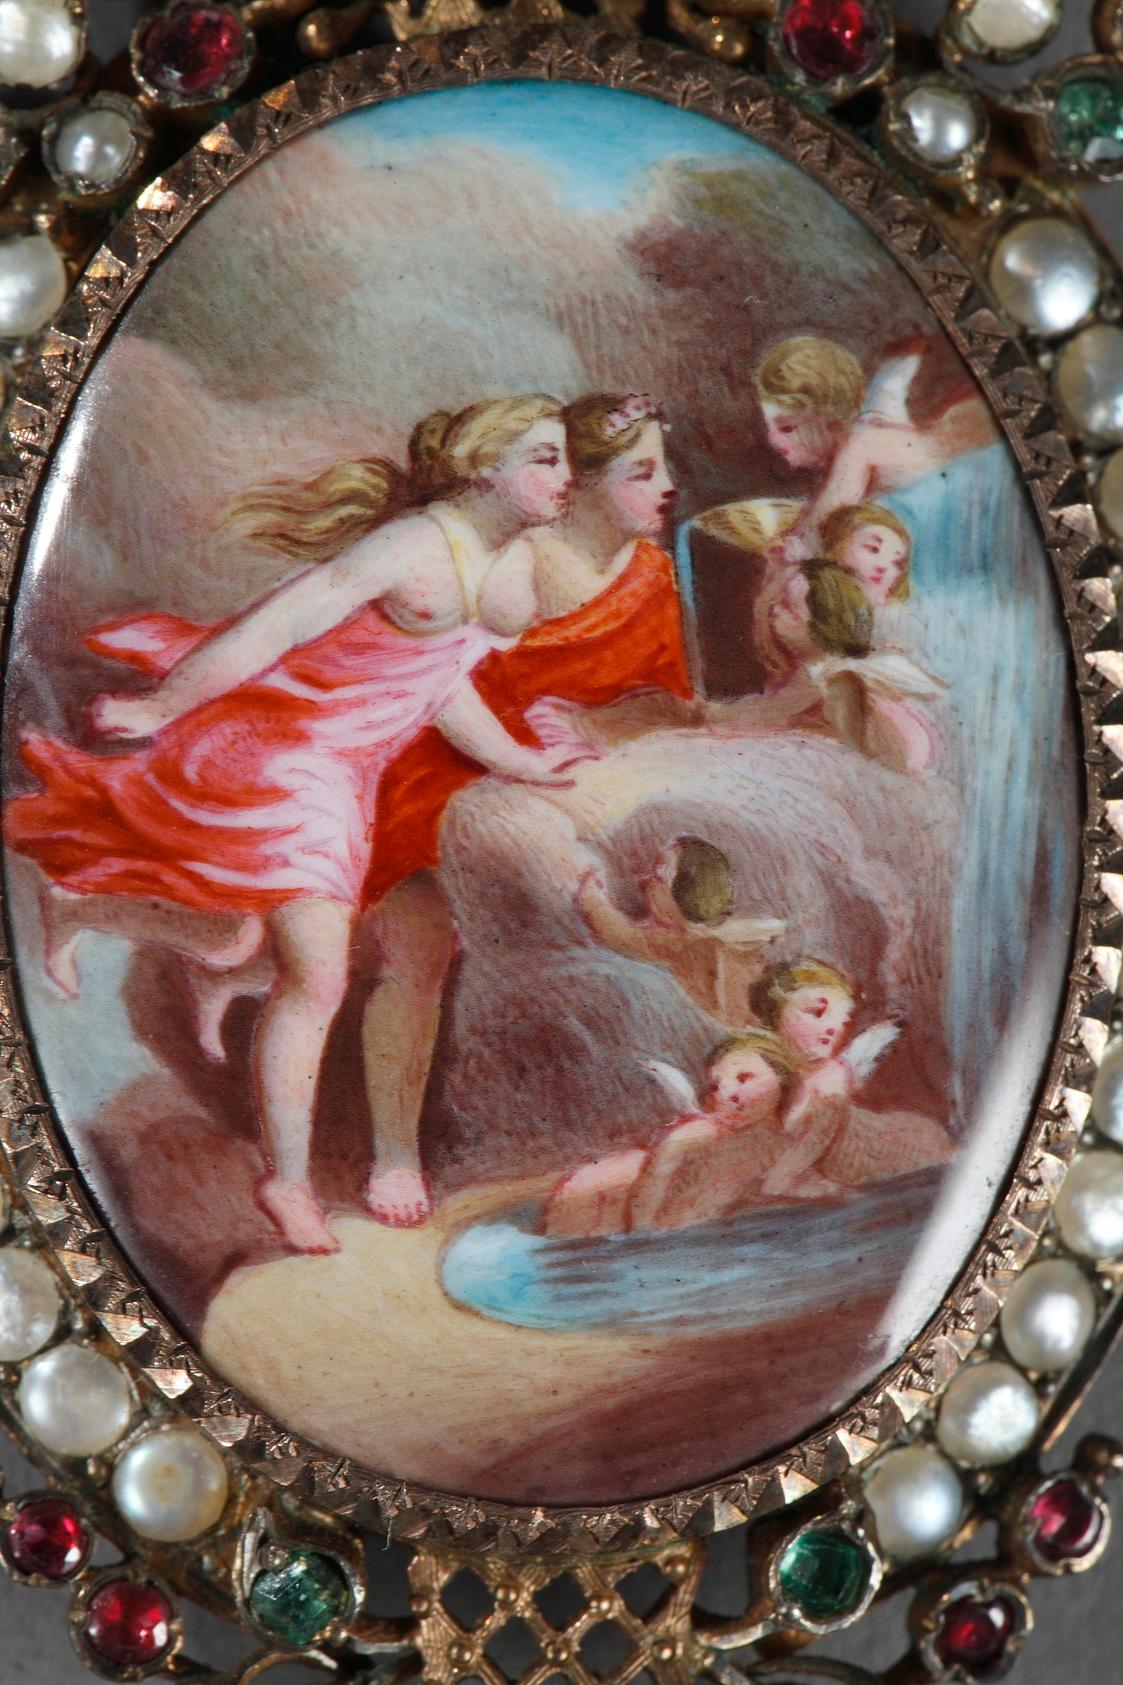 Silver-gilt pendant featuring a mythological scene on enamel representing La Fontaine de l’Amour (The Fountain of Love) after Jean-Honoré Fragonard. The setting is meticulously executed, embellished with delicate pearls, rubies, and emeralds that